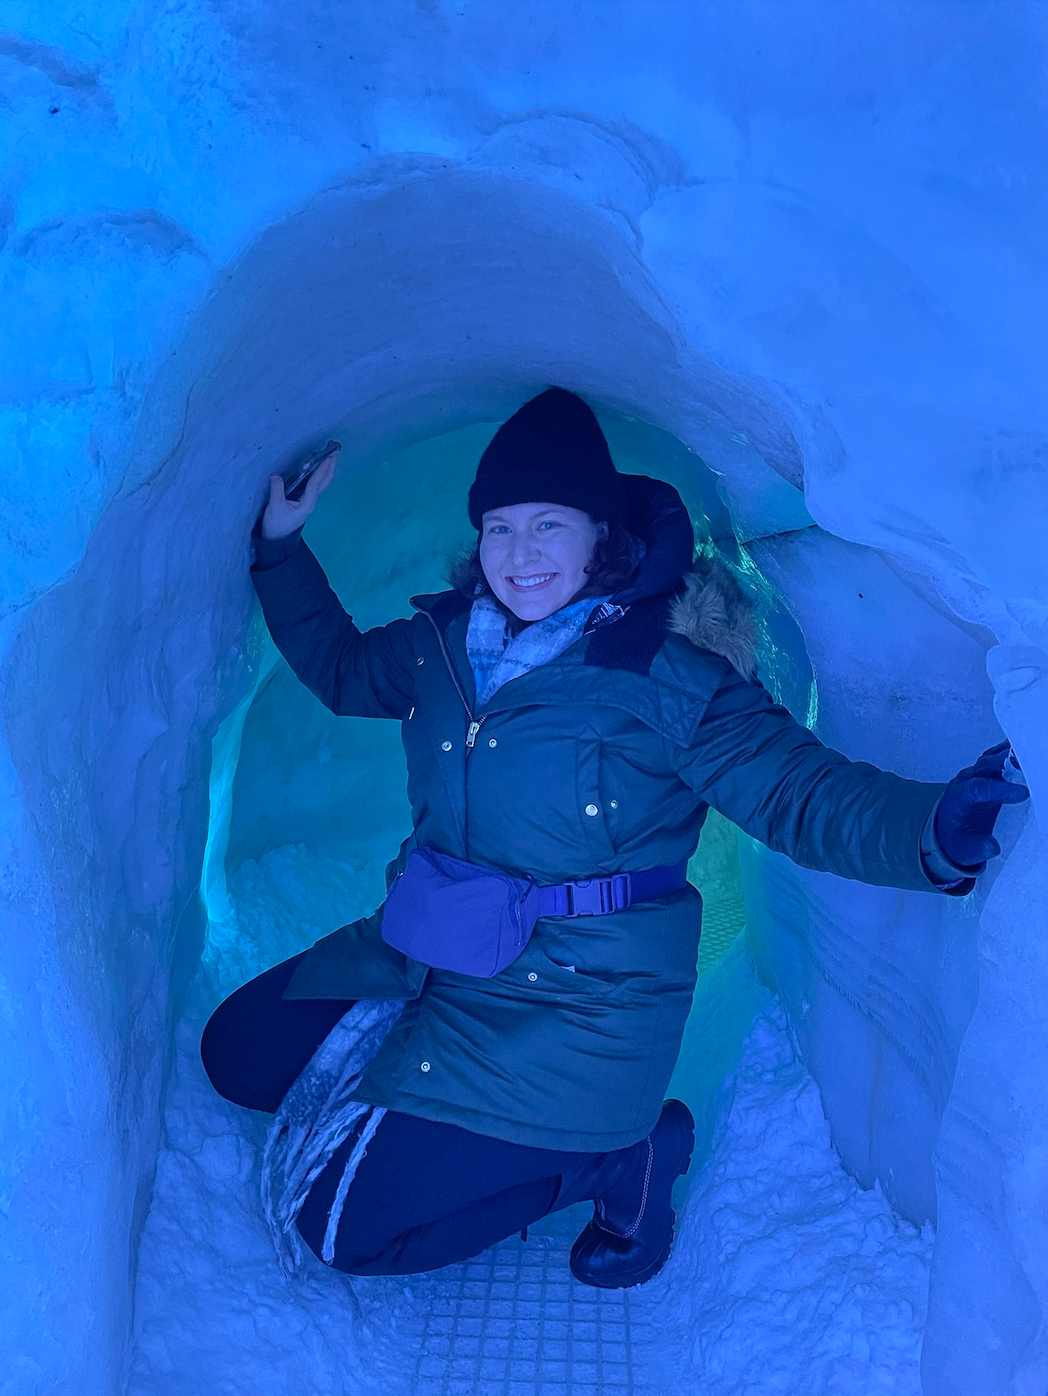 reviewer wearing the fanny pack over a heavy coat while posing in an ice cave